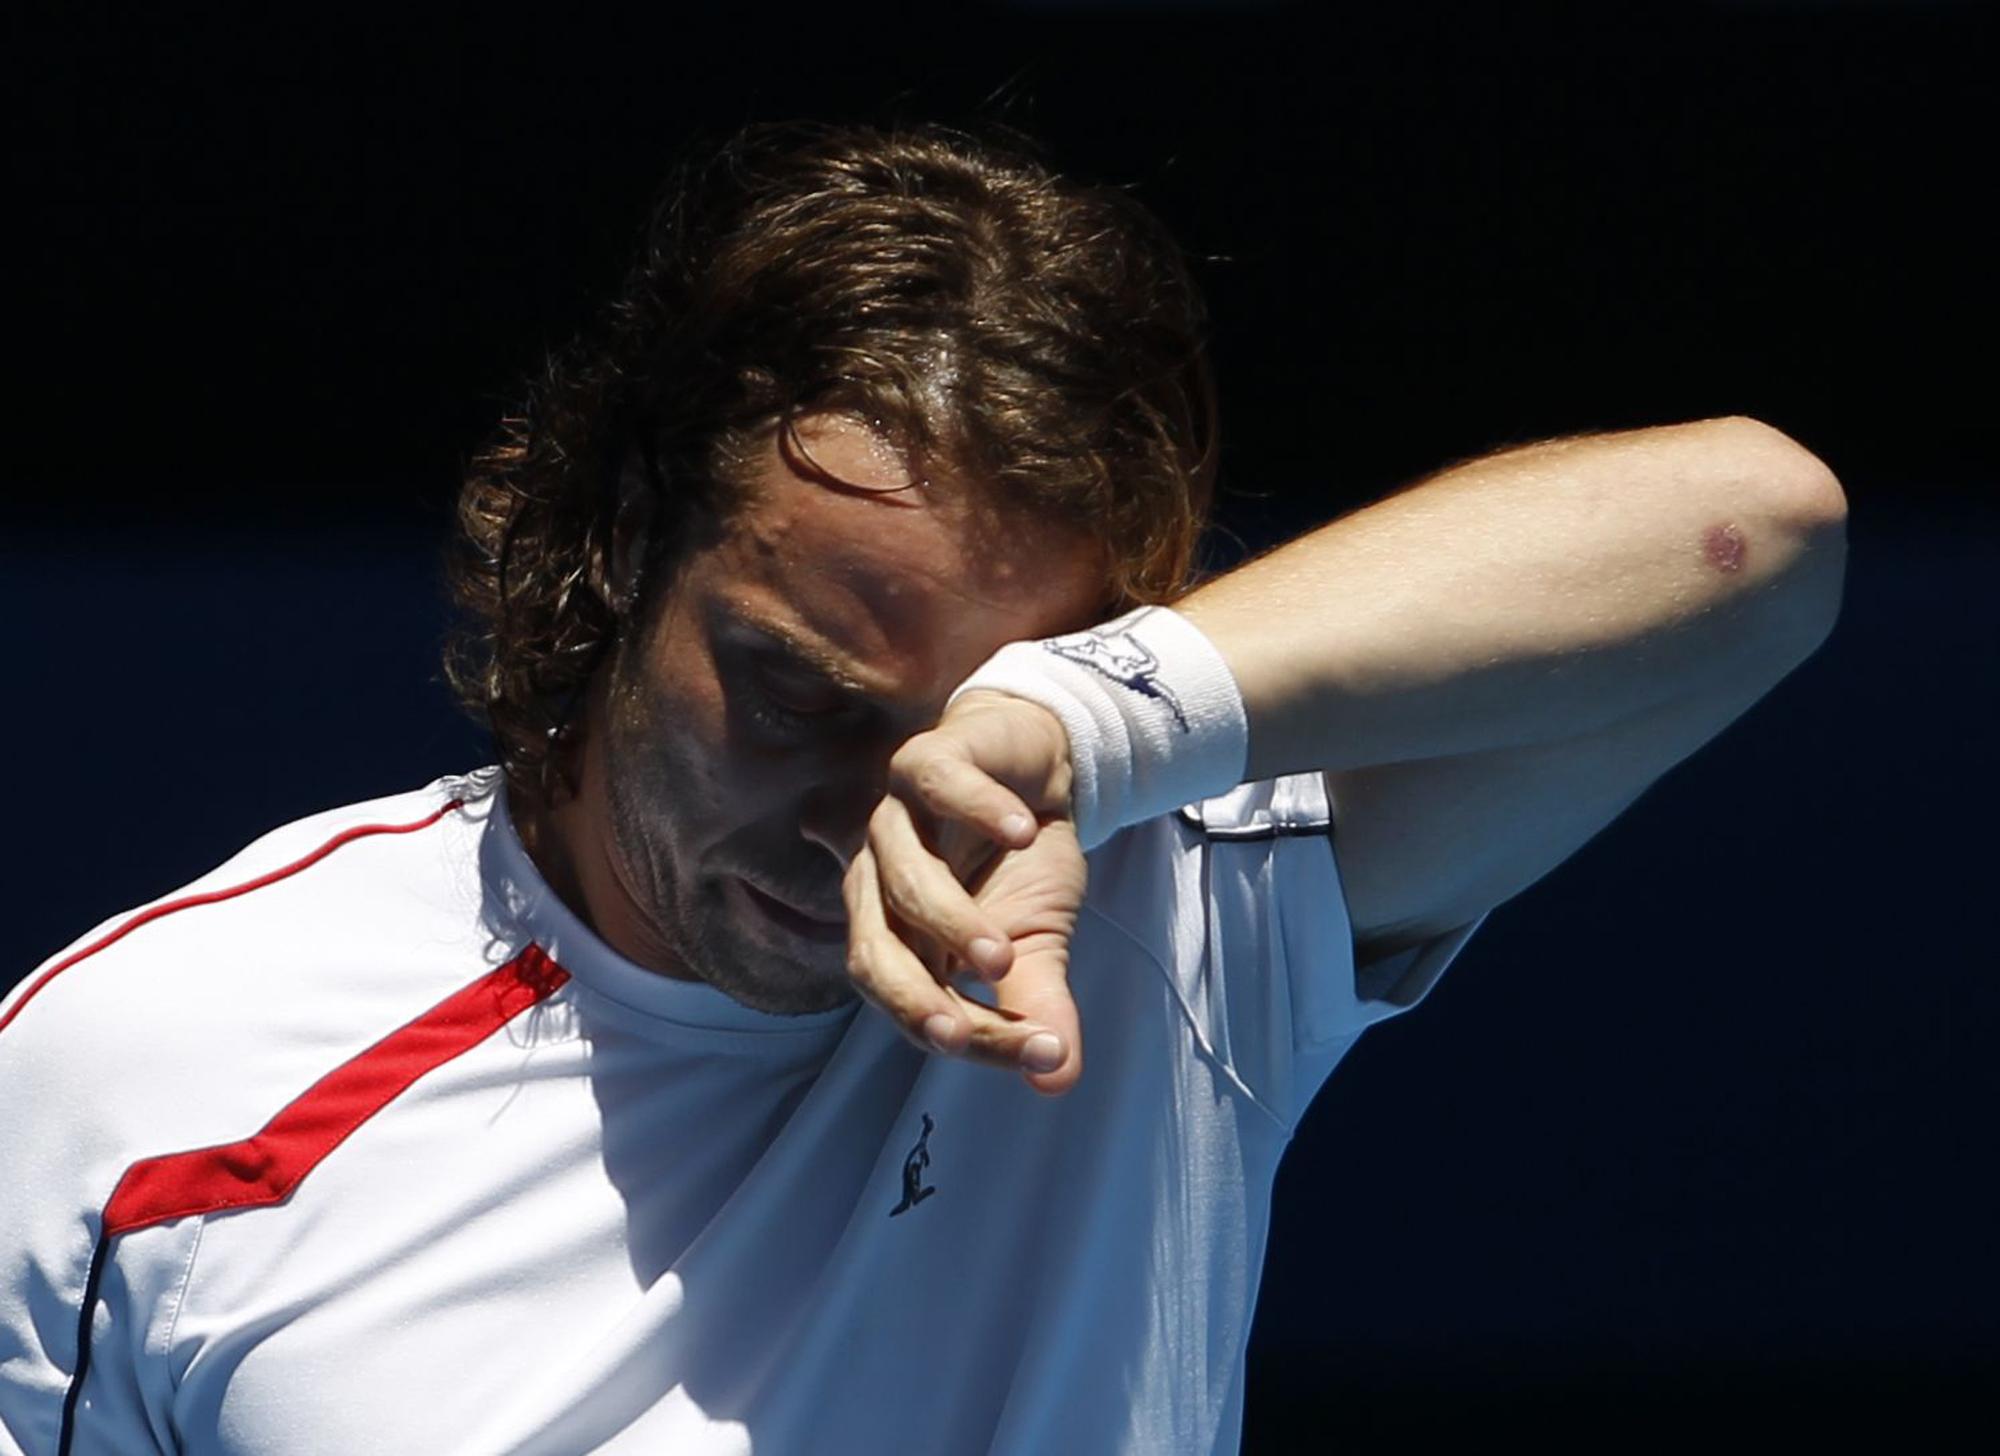 Paolo Lorenzi of Italy wipes perspiration from his forehead during his men's singles match against Novak Djokovic of Serbia at the Australian Open tennis tournament in Melbourne January 17, 2012. REUTERS/Tim Wimborne (AUSTRALIA - Tags: SPORT TENNIS) [REUTERS - Tim Wimborne]